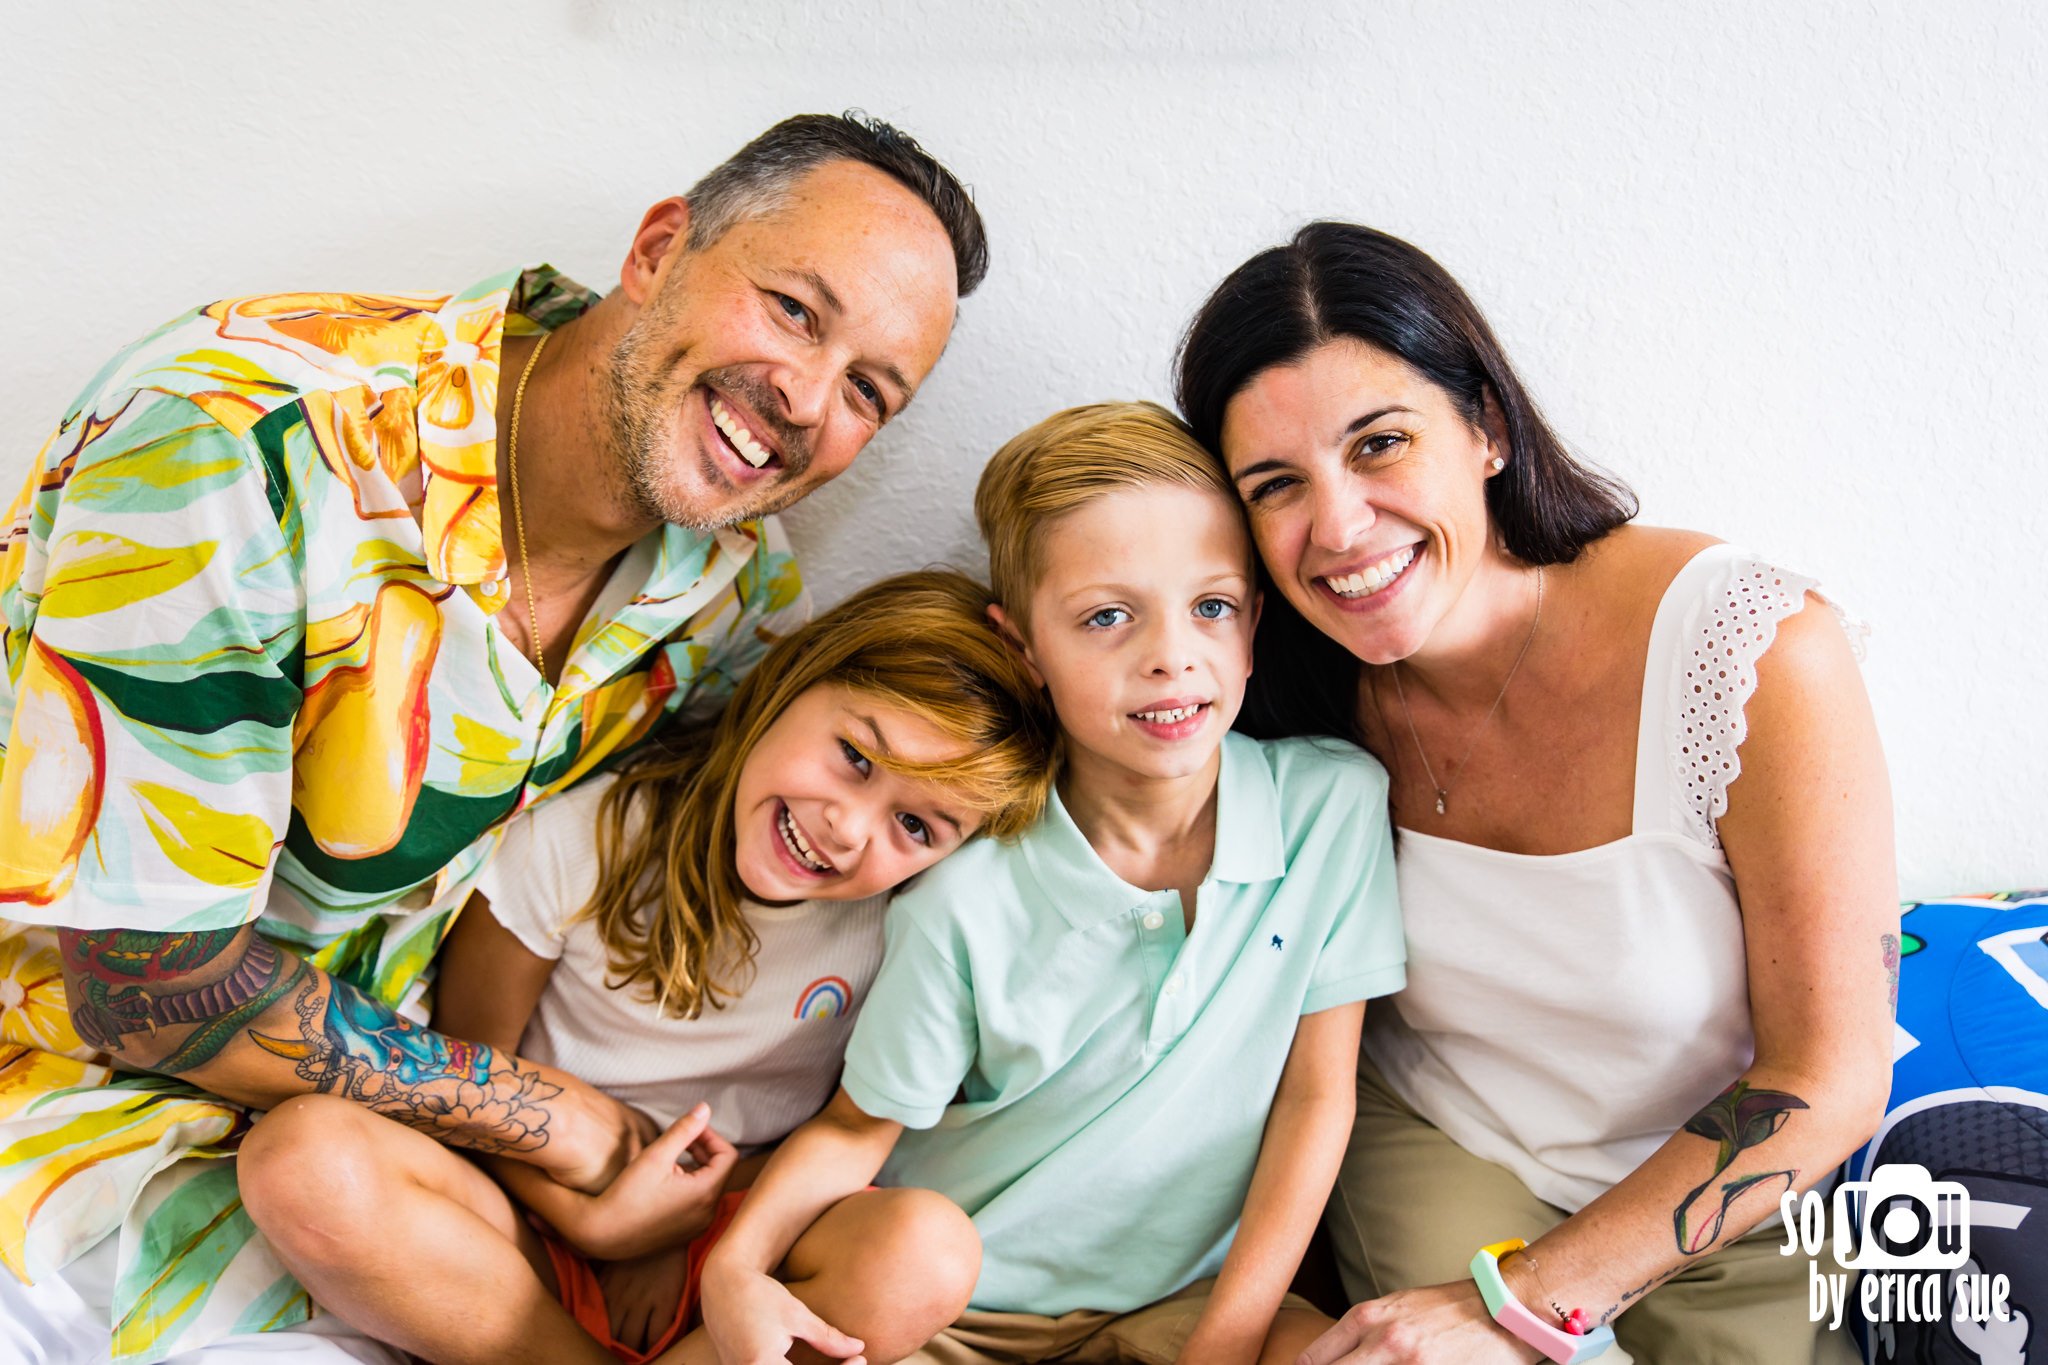 13-jury-fam-at-home-lifestyle-family-photographer-miami-fl-so-you-by-erica-sue-ES2_8411.jpg